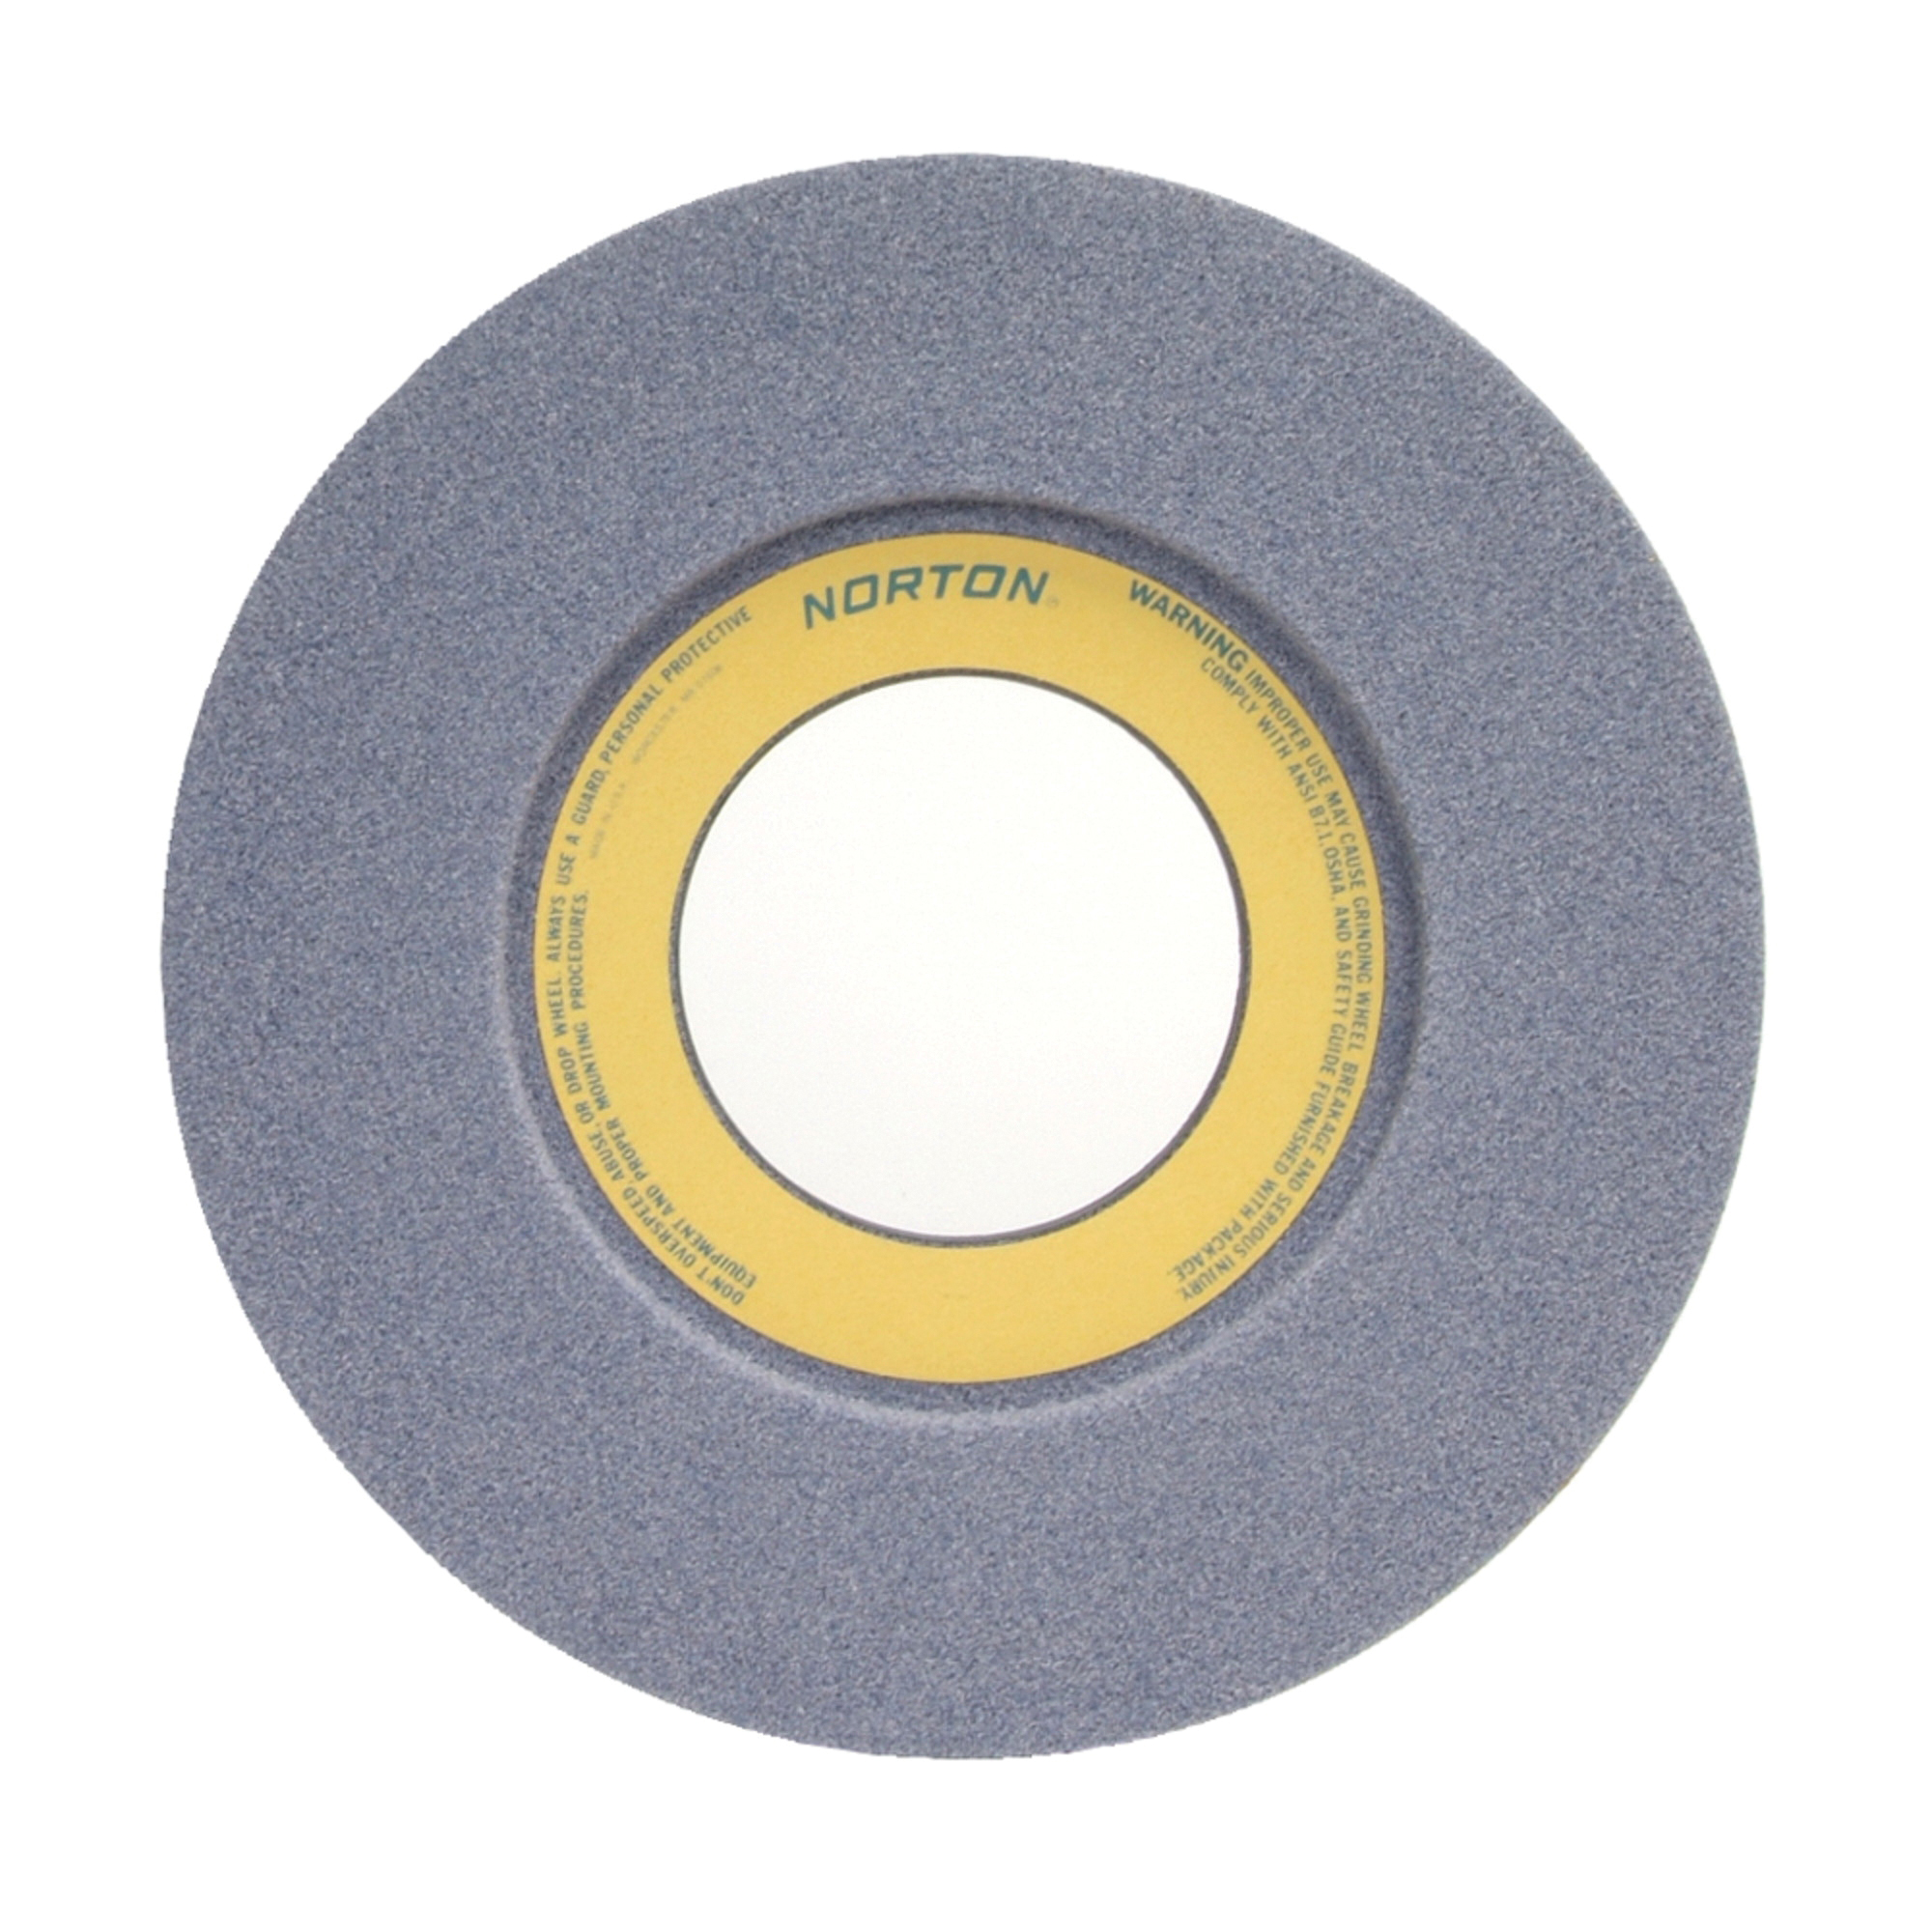 Norton® 66253364362 32A 1-Side Recessed Toolroom Wheel, 14 in Dia x 1-1/2 in THK, 5 in Center Hole, 46 Grit, Aluminum Oxide Abrasive